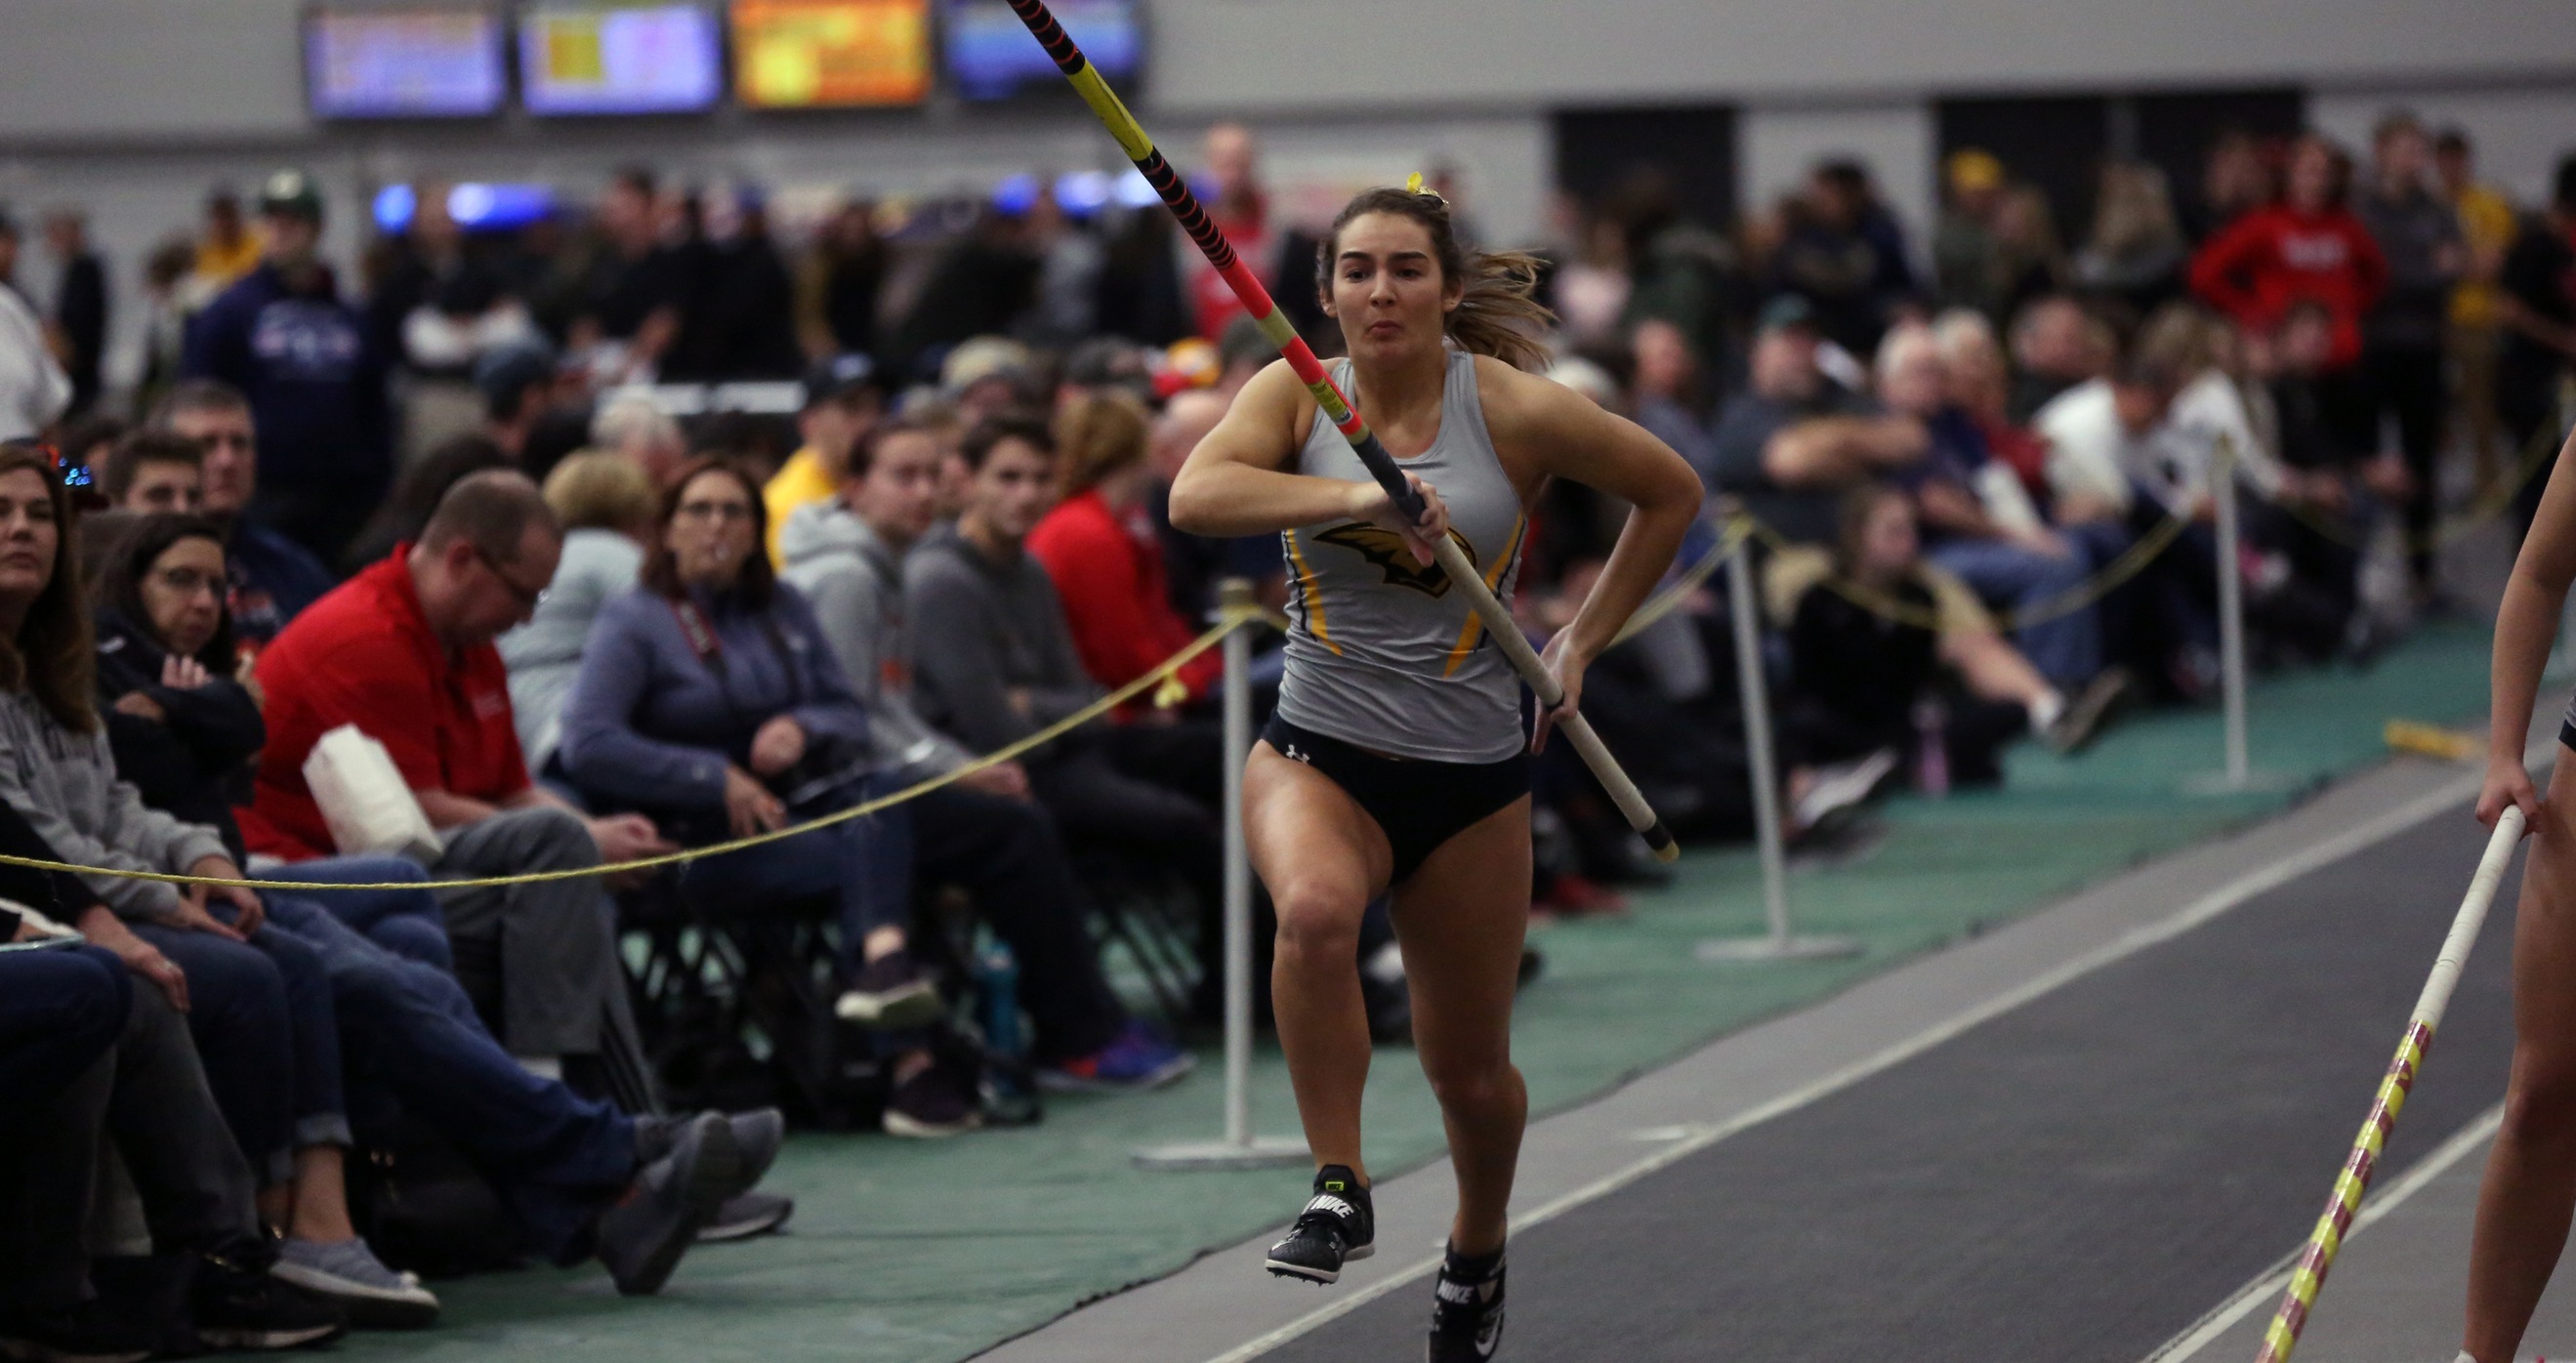 Emma Warr recorded a nation-leading height of 11-5 3/4 in the pole vault against the Warhawks.